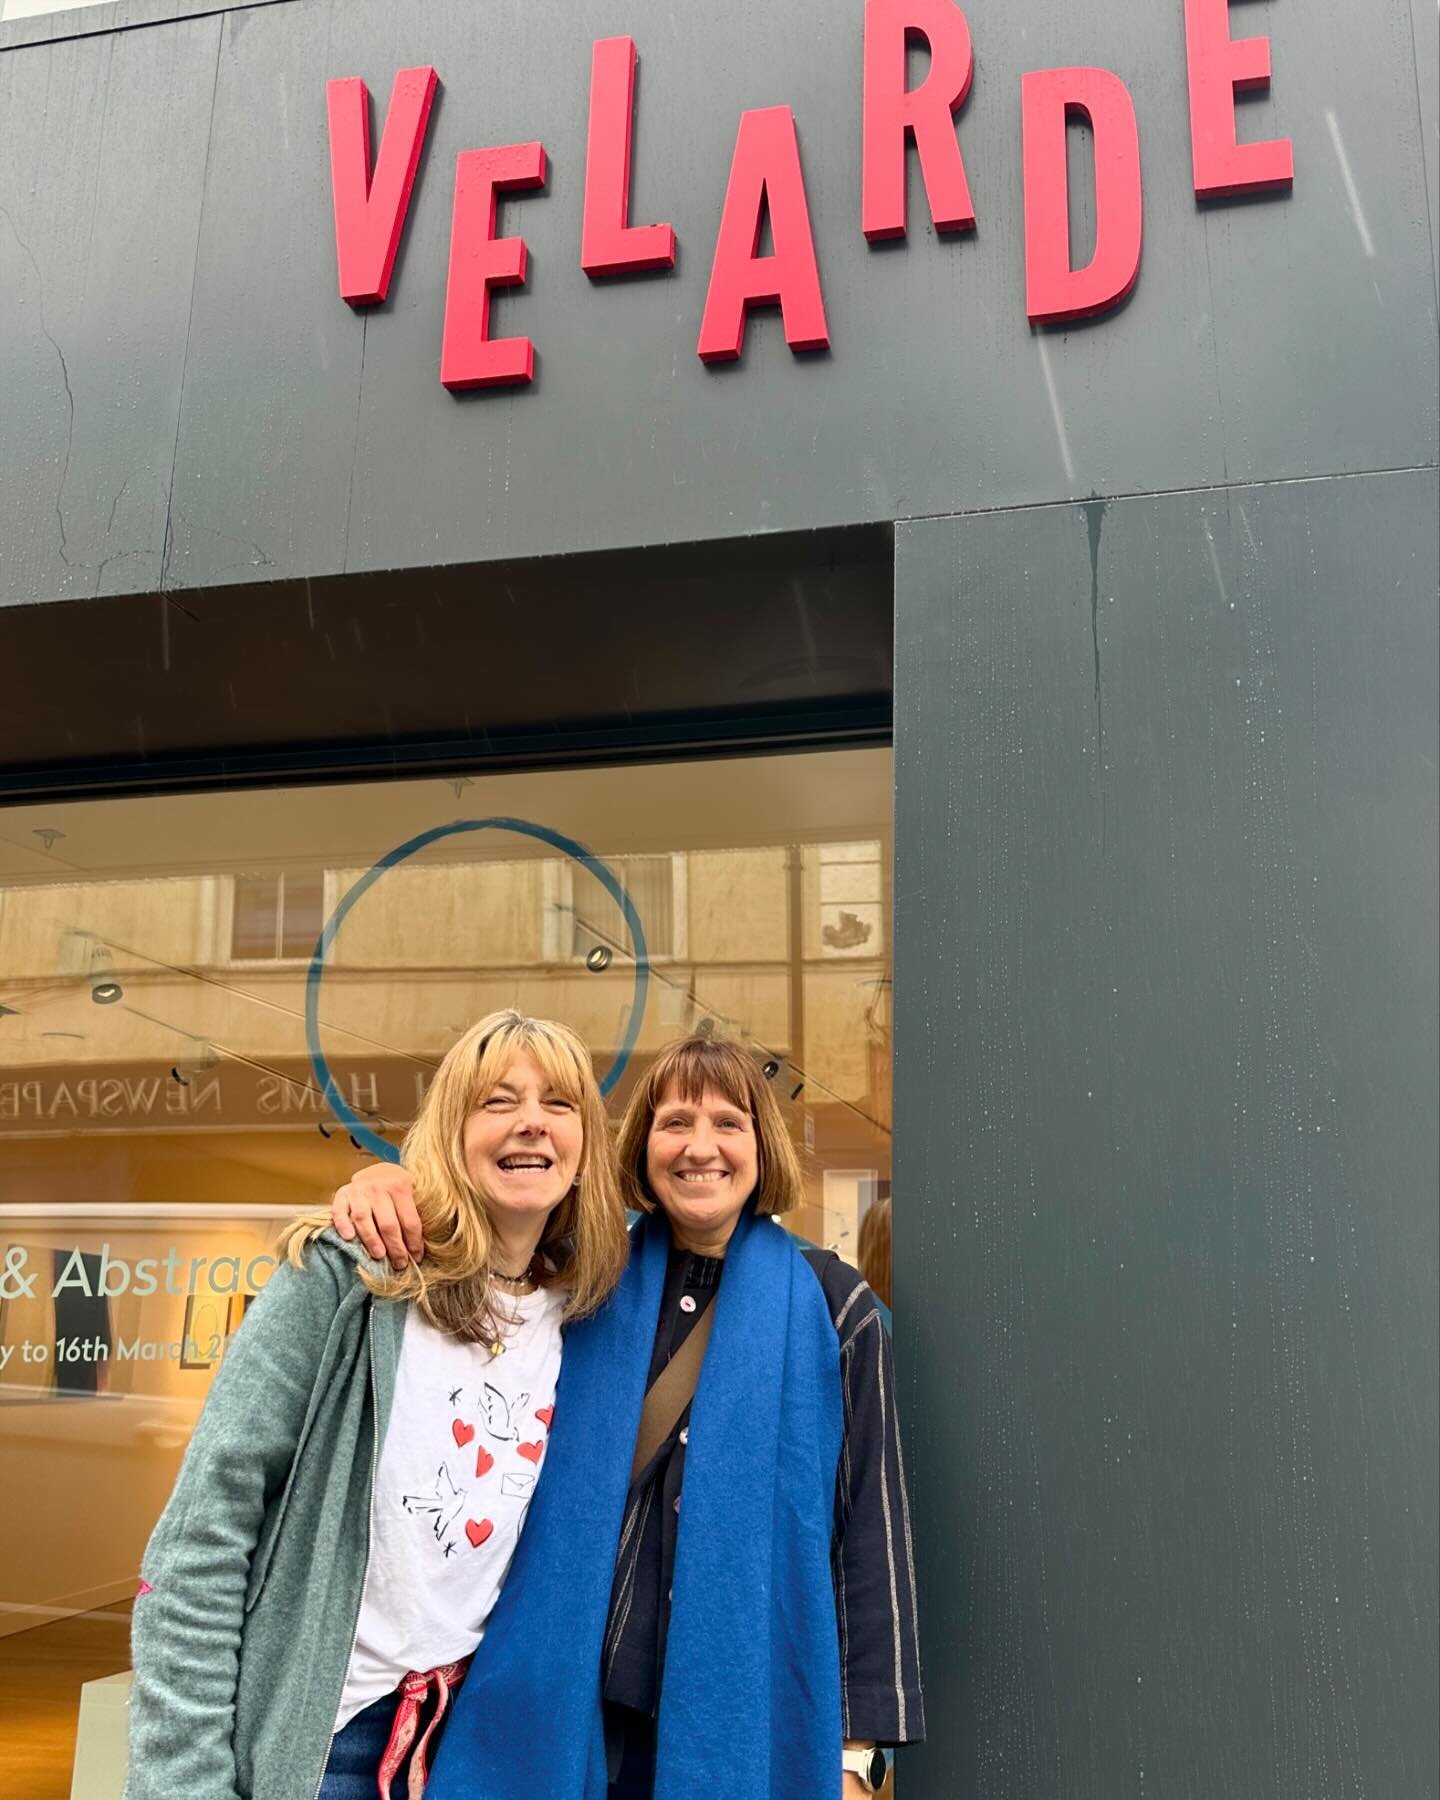 #fun visit to the amazing @velardegallery today in #kingsbridgedevon Fi and Matt have done an amazing transformative renovation to create this beautiful #galleryspace and #sculturegarden We just caught the &lsquo;altered and abstracted&rsquo;  #exhib